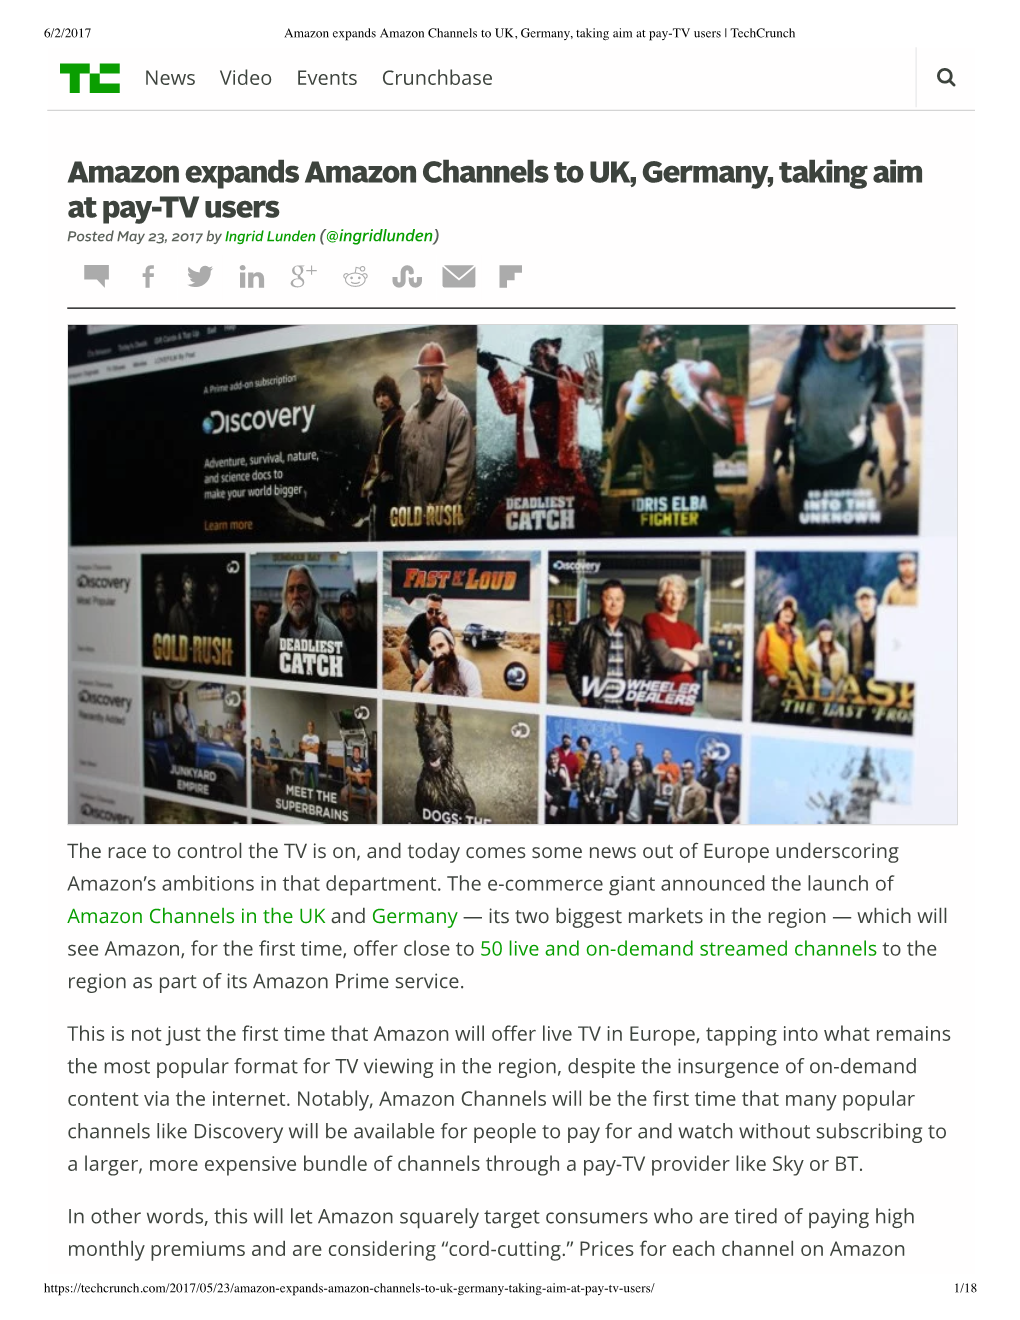 Amazon Expands Amazon Channels to UK, Germany, Taking Aim at Pay-TV Users | Techcrunch